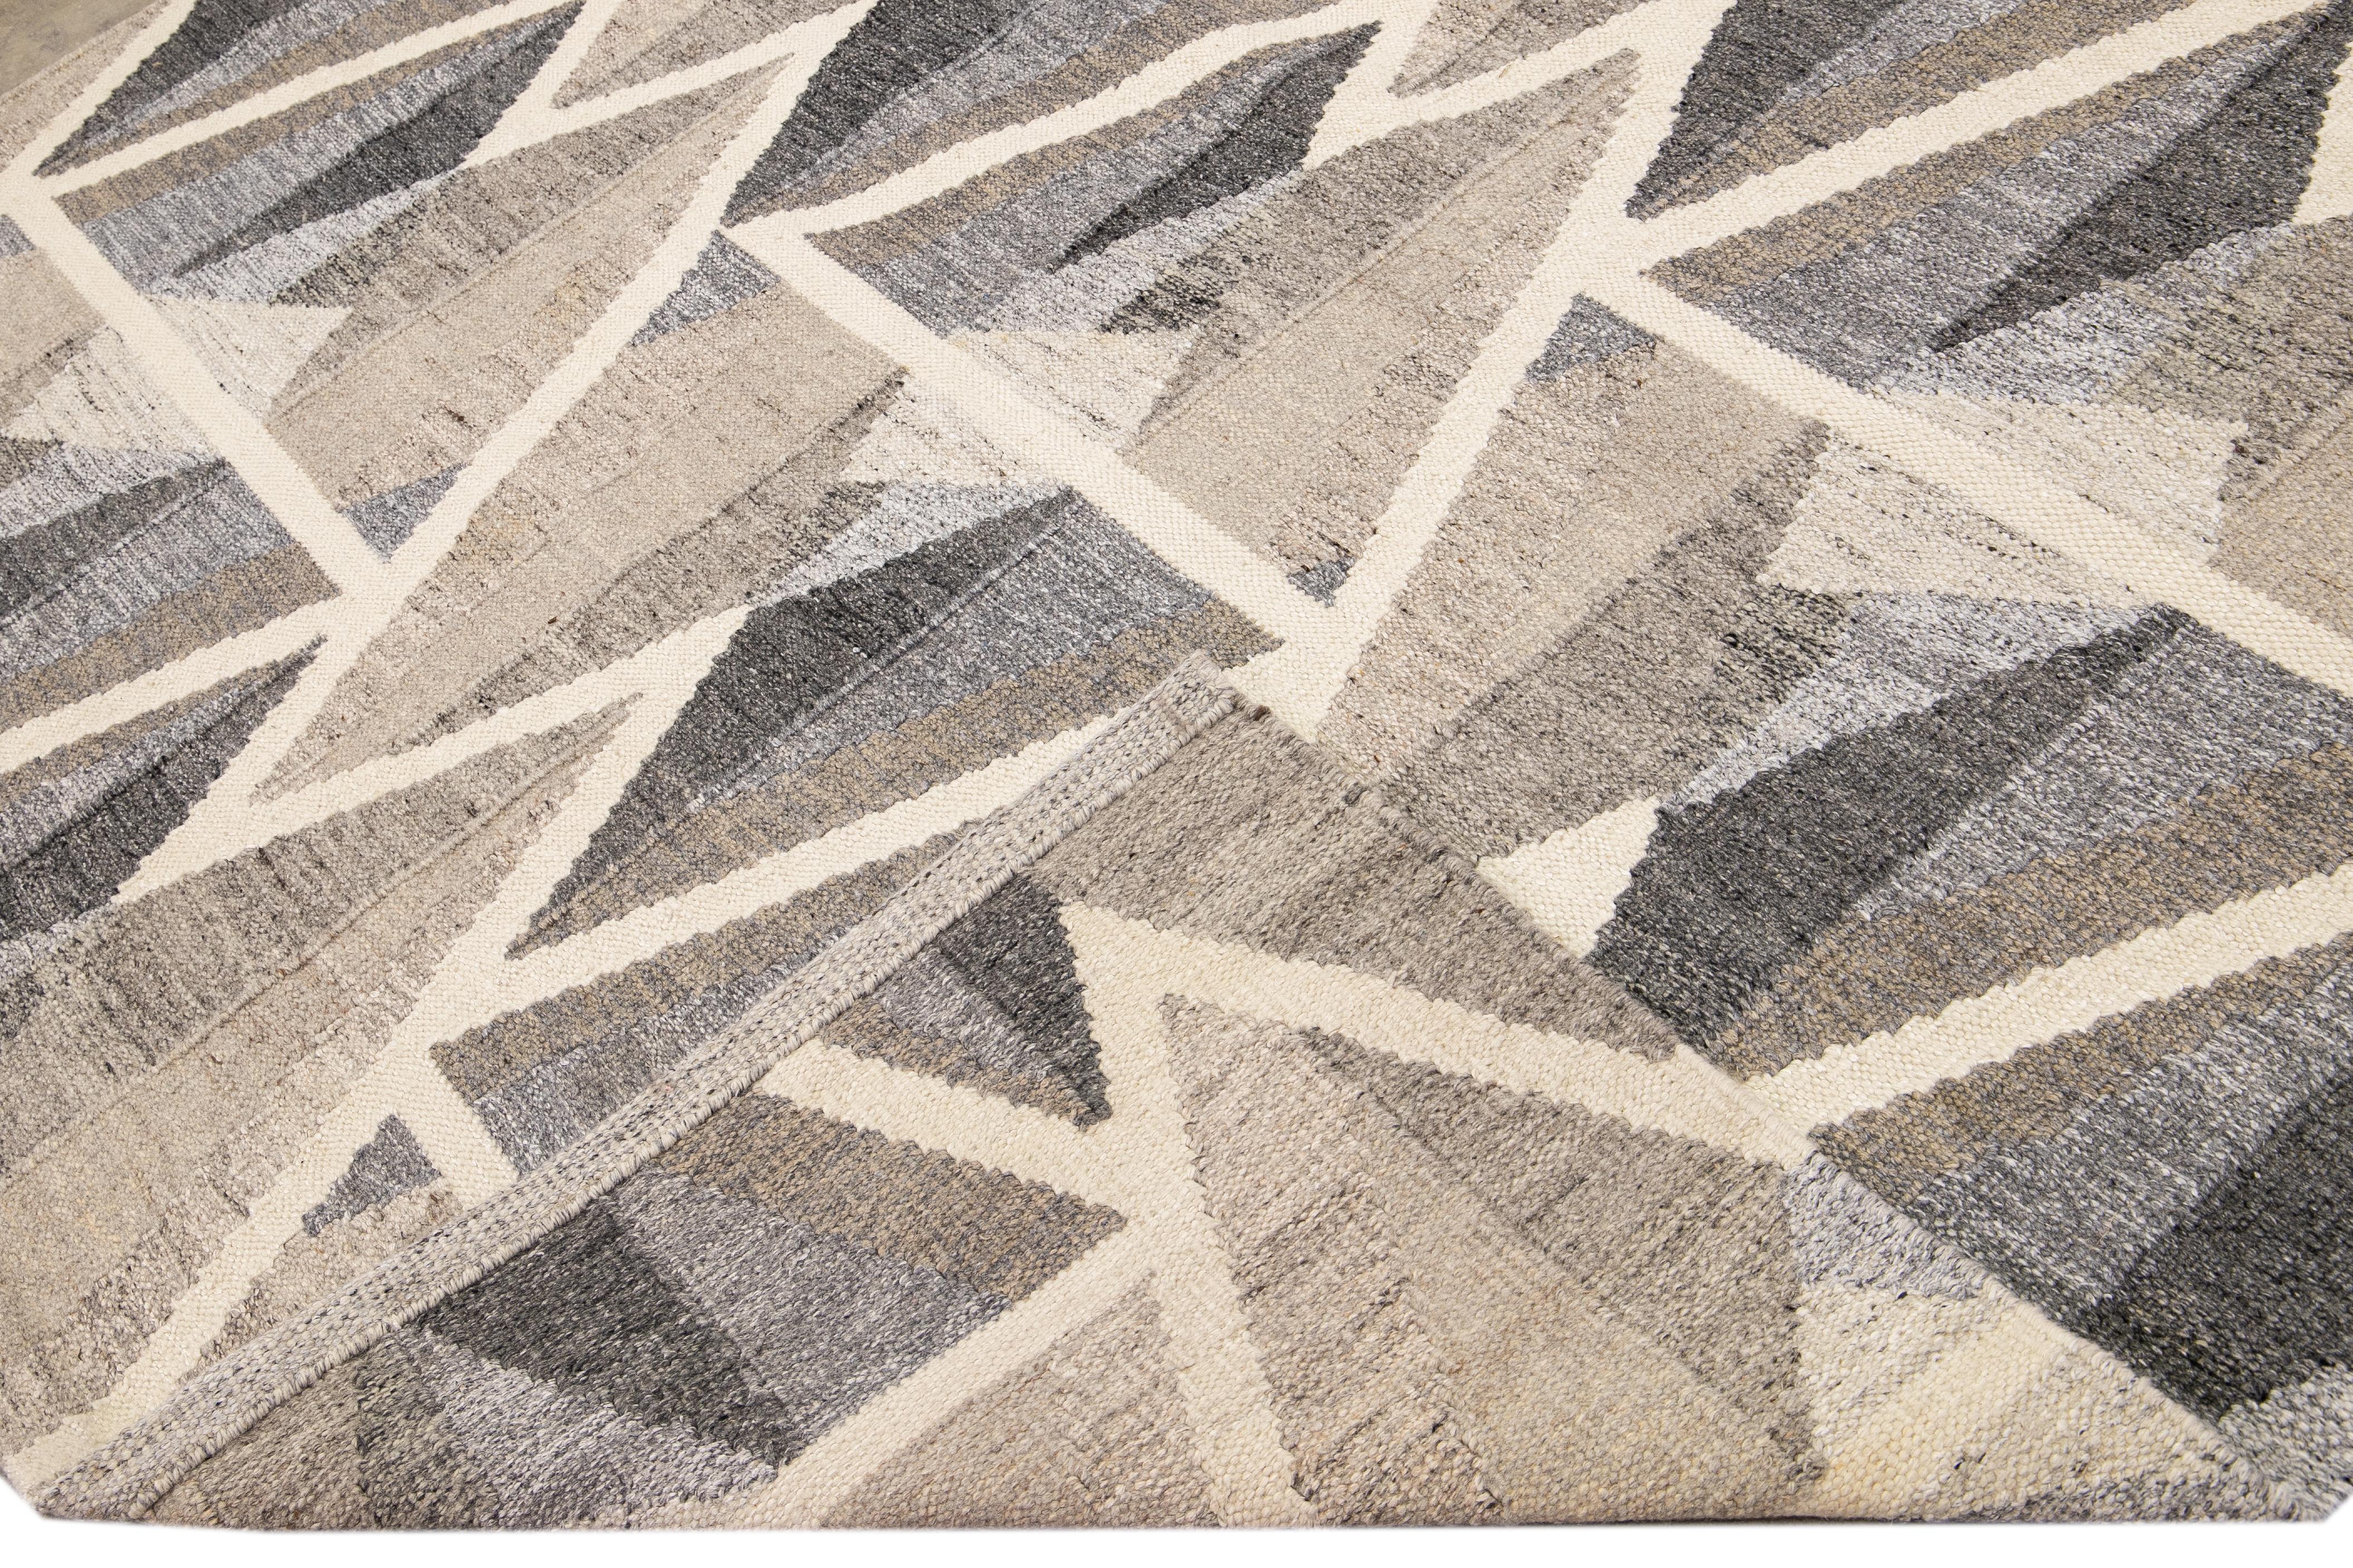 Beautiful modern Swedish Style flat-weave wool rug. This Kilim rug full of art has a brown, beige, and gray field in a gorgeous geometric abstract design.

This rug measures: 9'2